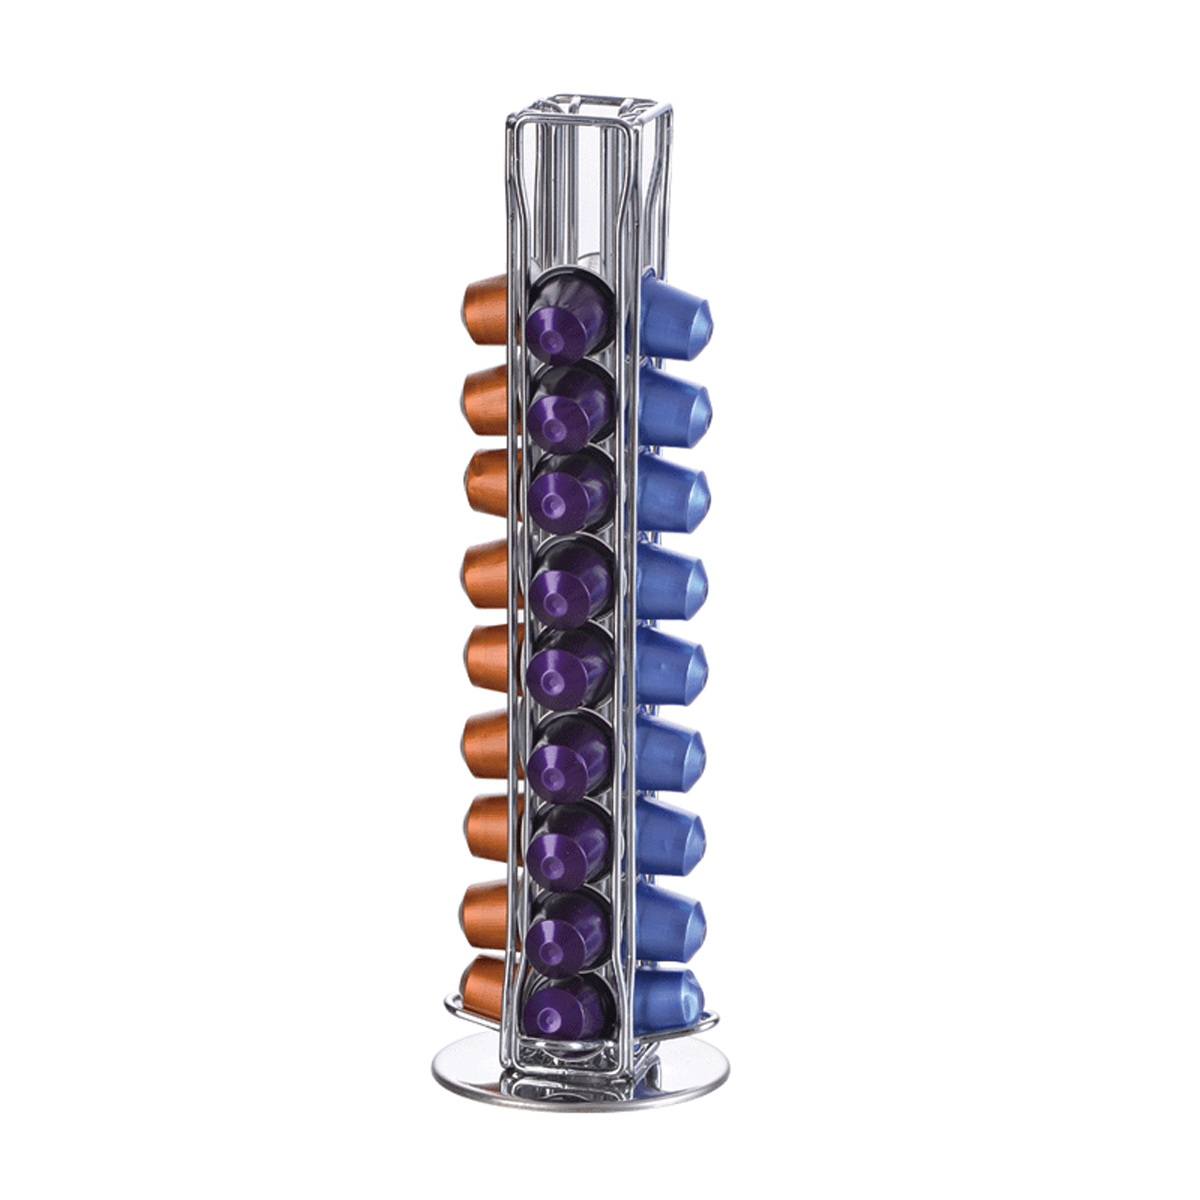 40pcs-Capacity-Coffee-Capsule-Cup-Holder-Storage-Stand-Chrome-Tower-Mount-Rack-for-Nespresso-1302799-1